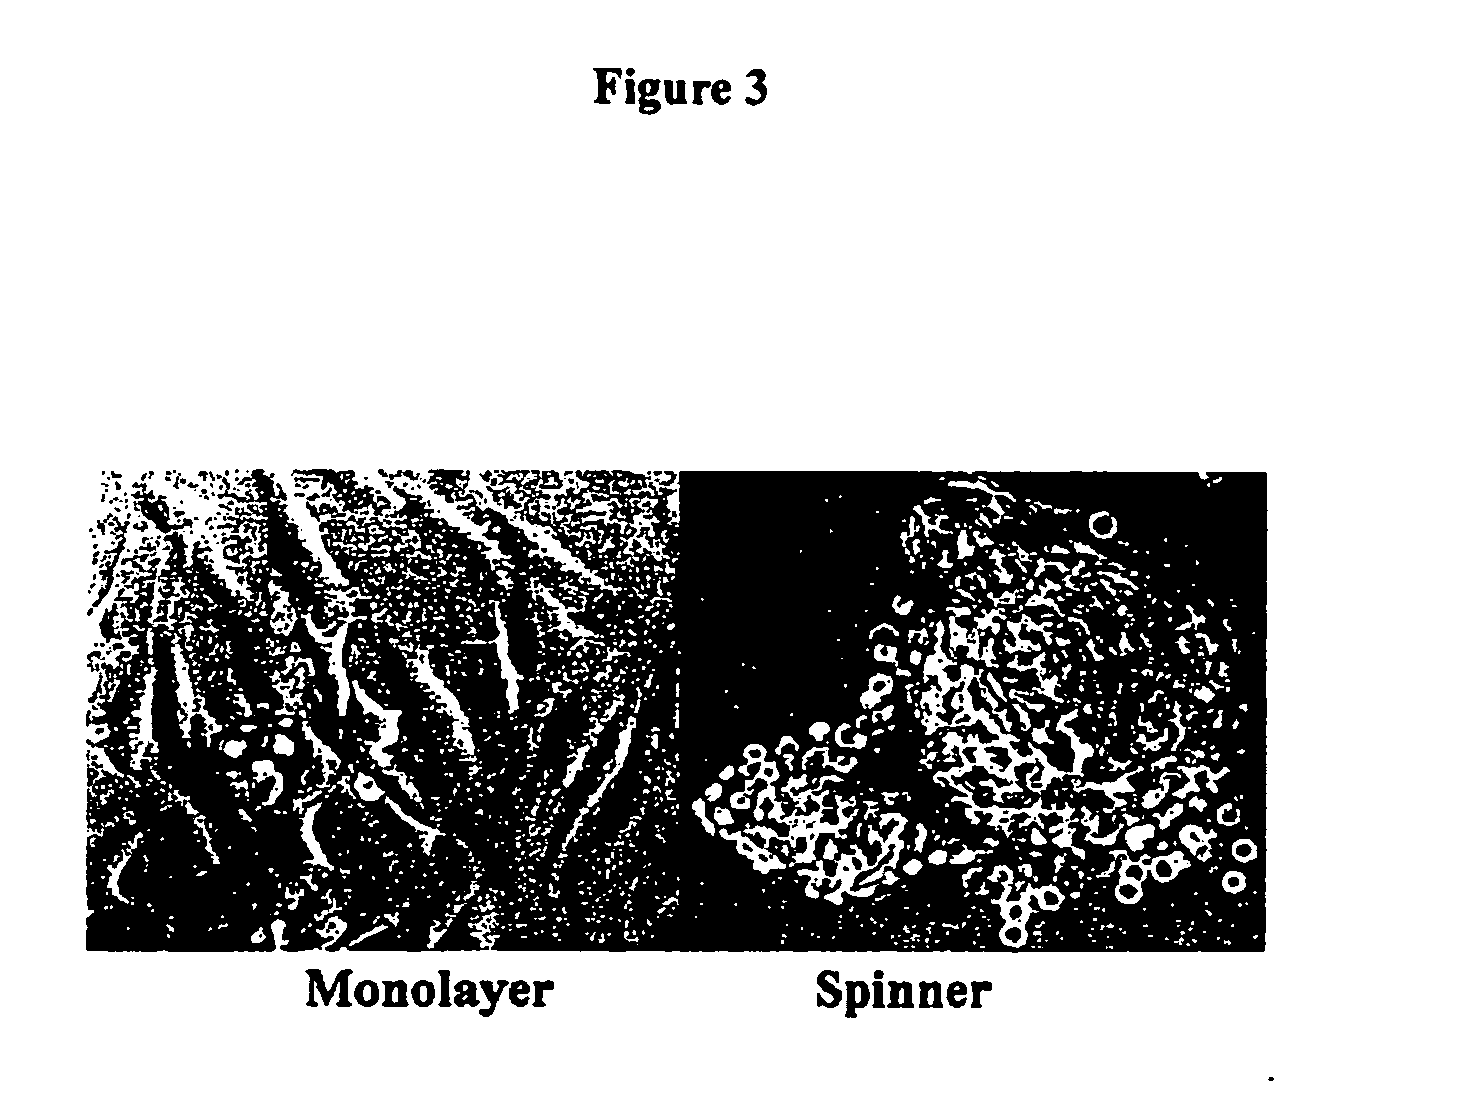 Tissue analogs for in vitro testing and method of use therefor